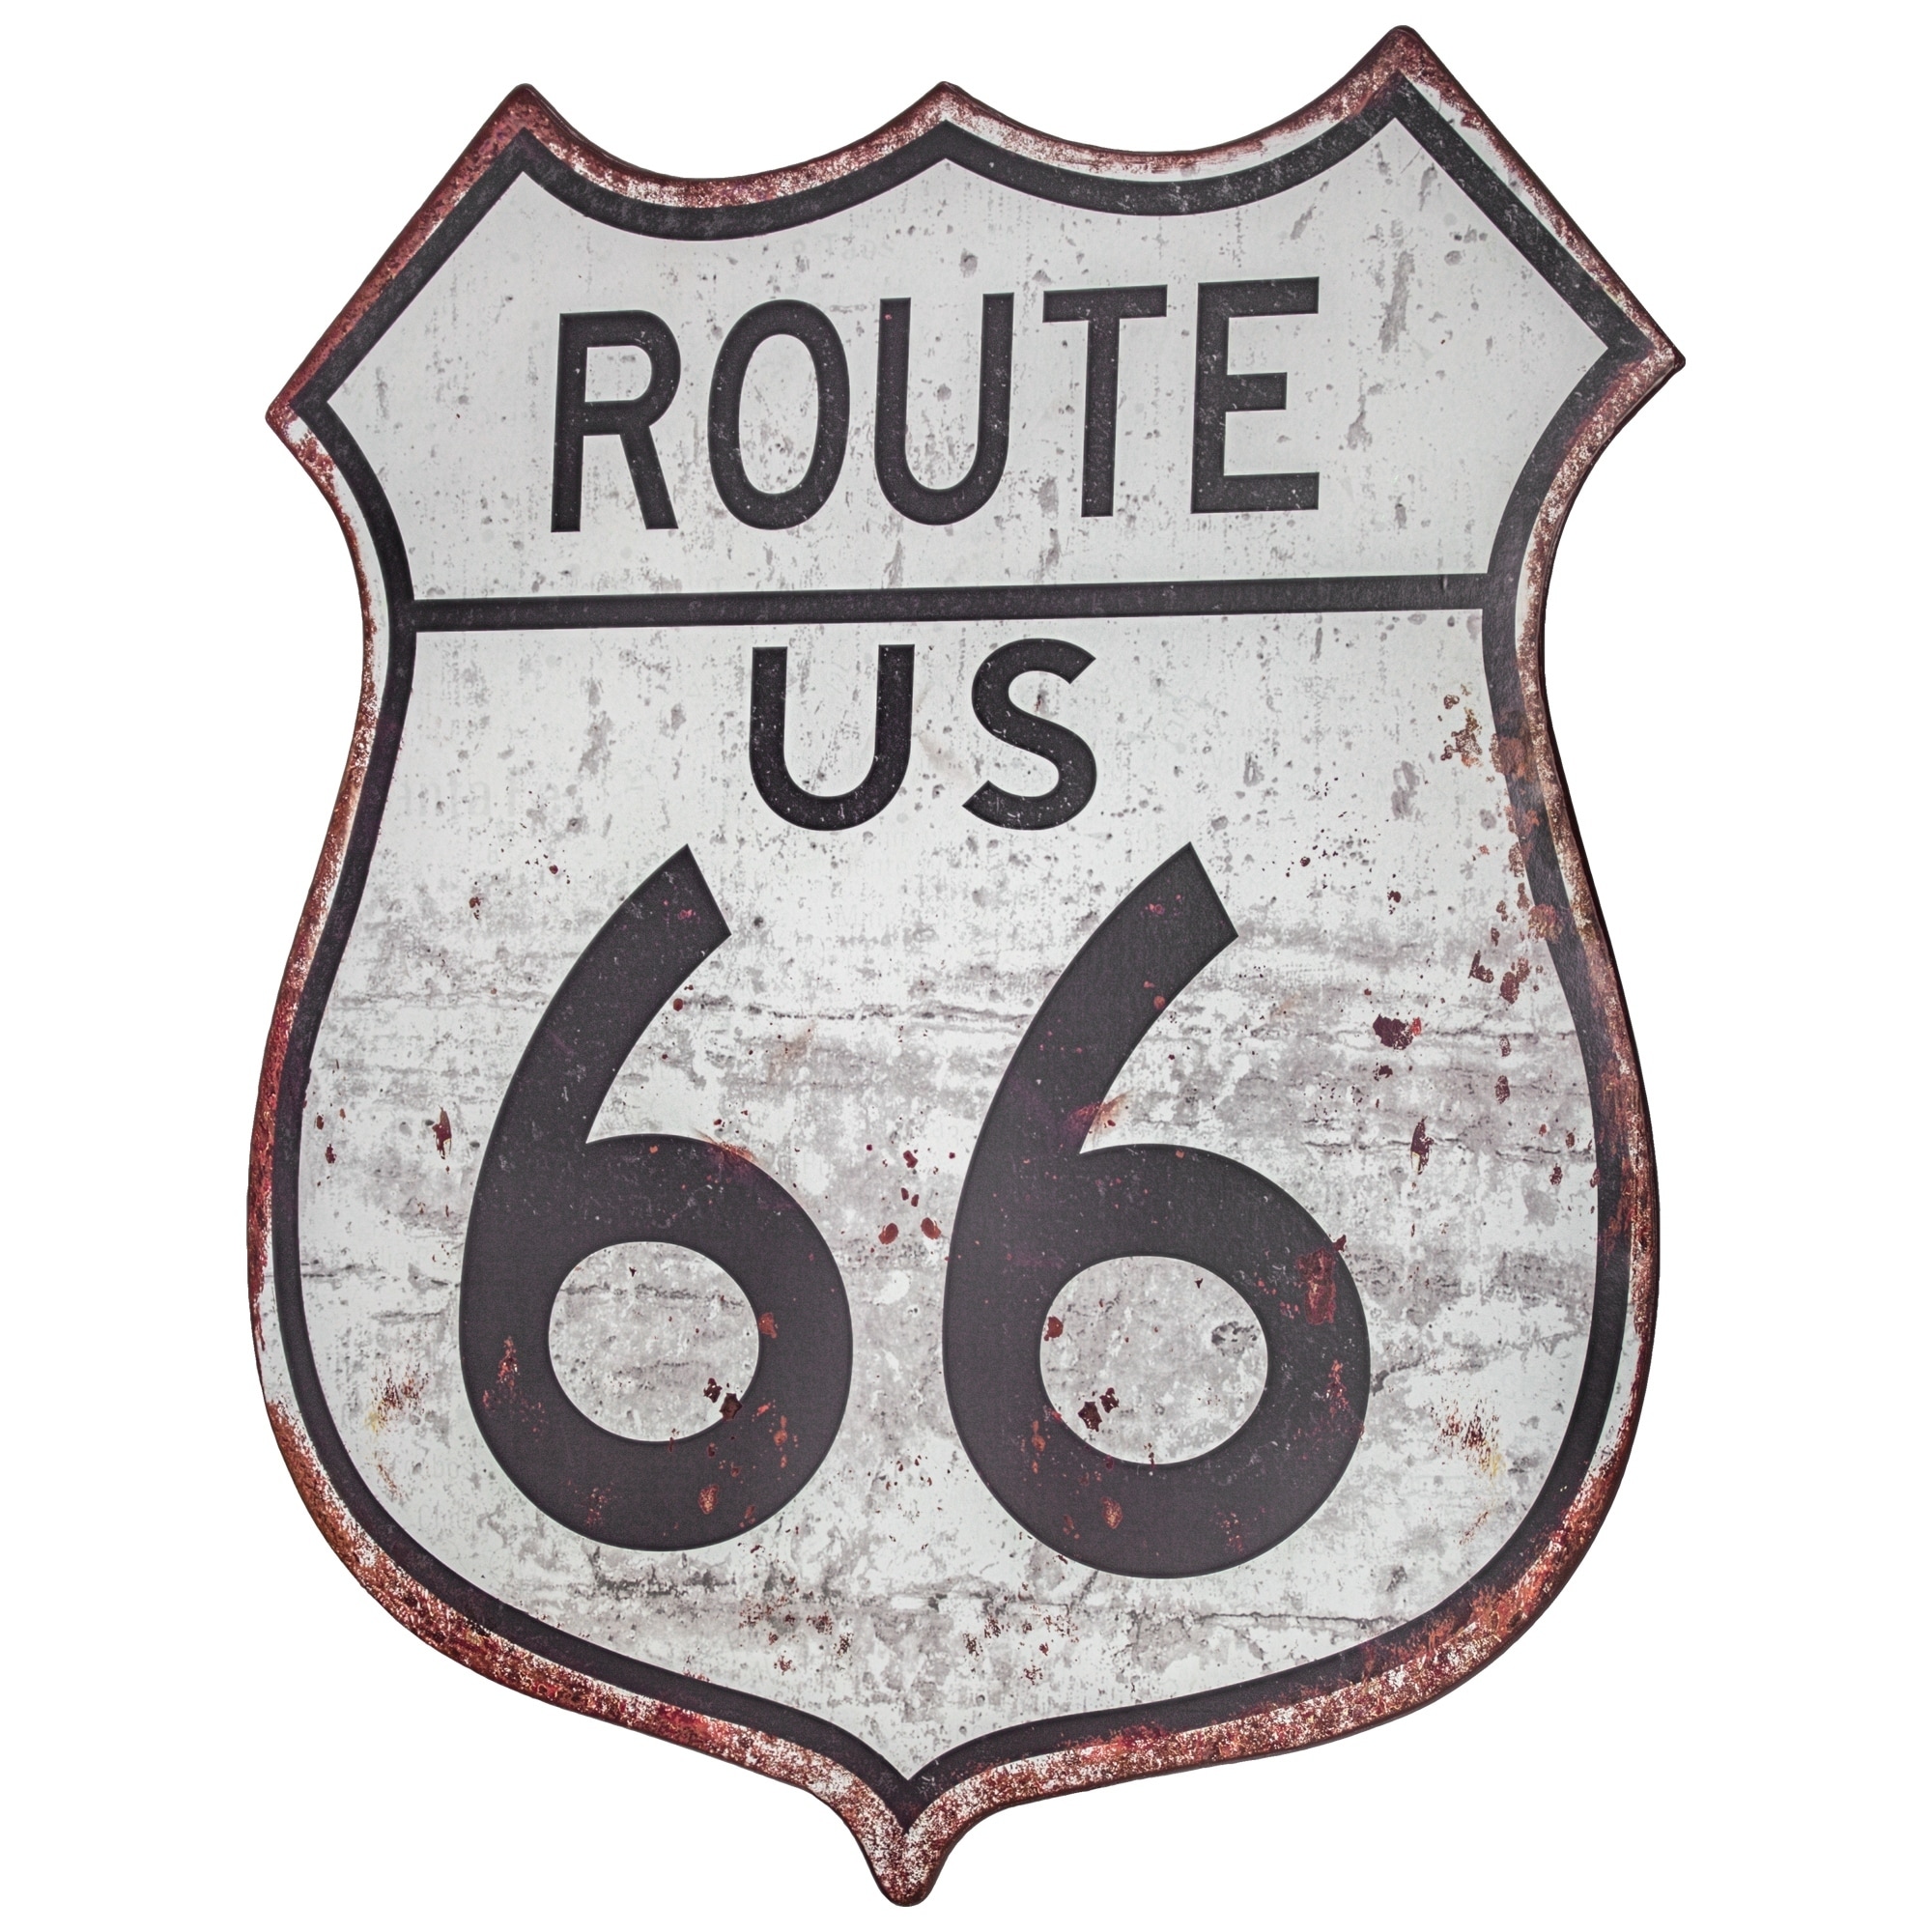 Route 66 Diamond 11" Highway Shield Metal Sign Novelty Retro Home Wall Decor 